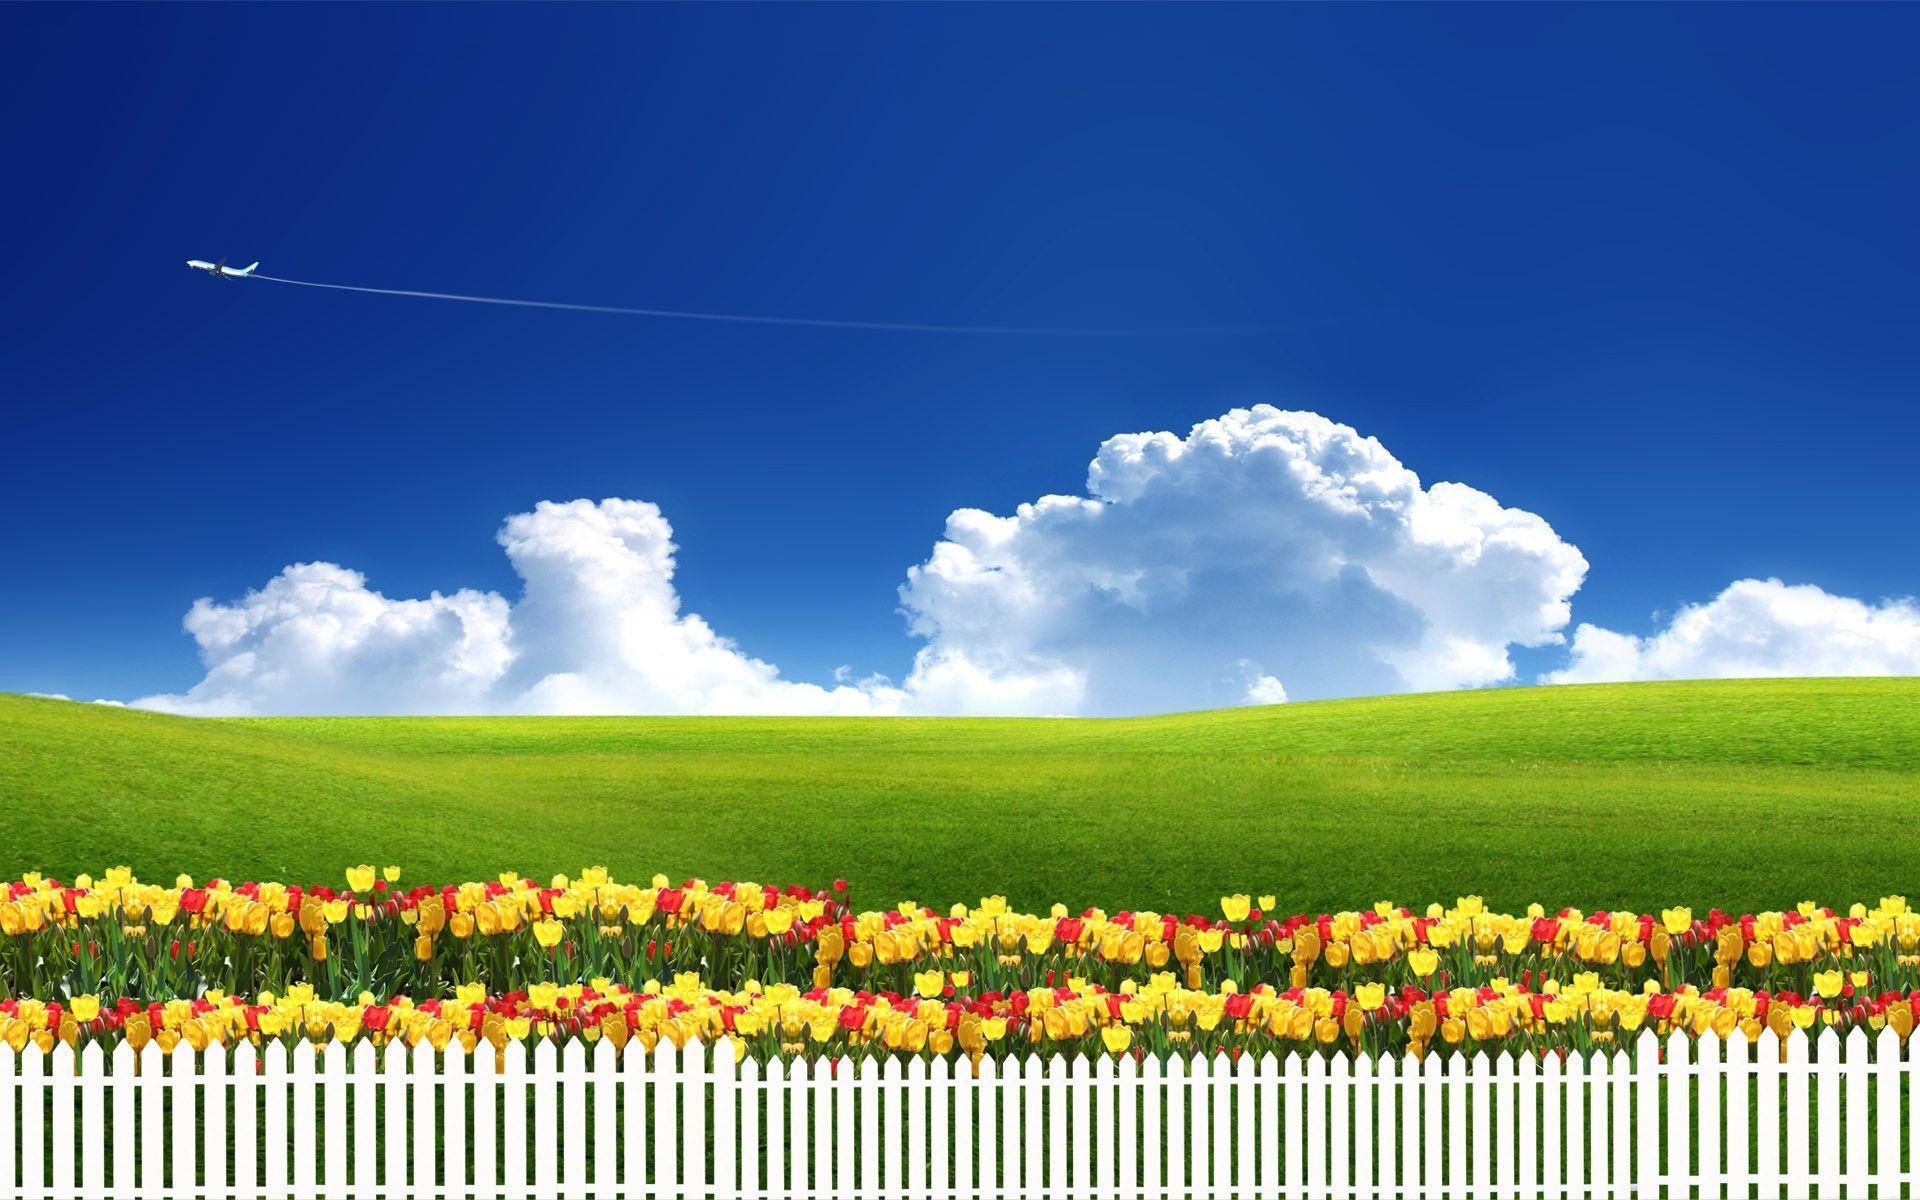 Spring season wallpaper Resolution 1920x1200 | Best Download this awesome wallpaper - Cool Wallpaper HD - CoolWallpaper-HD.com